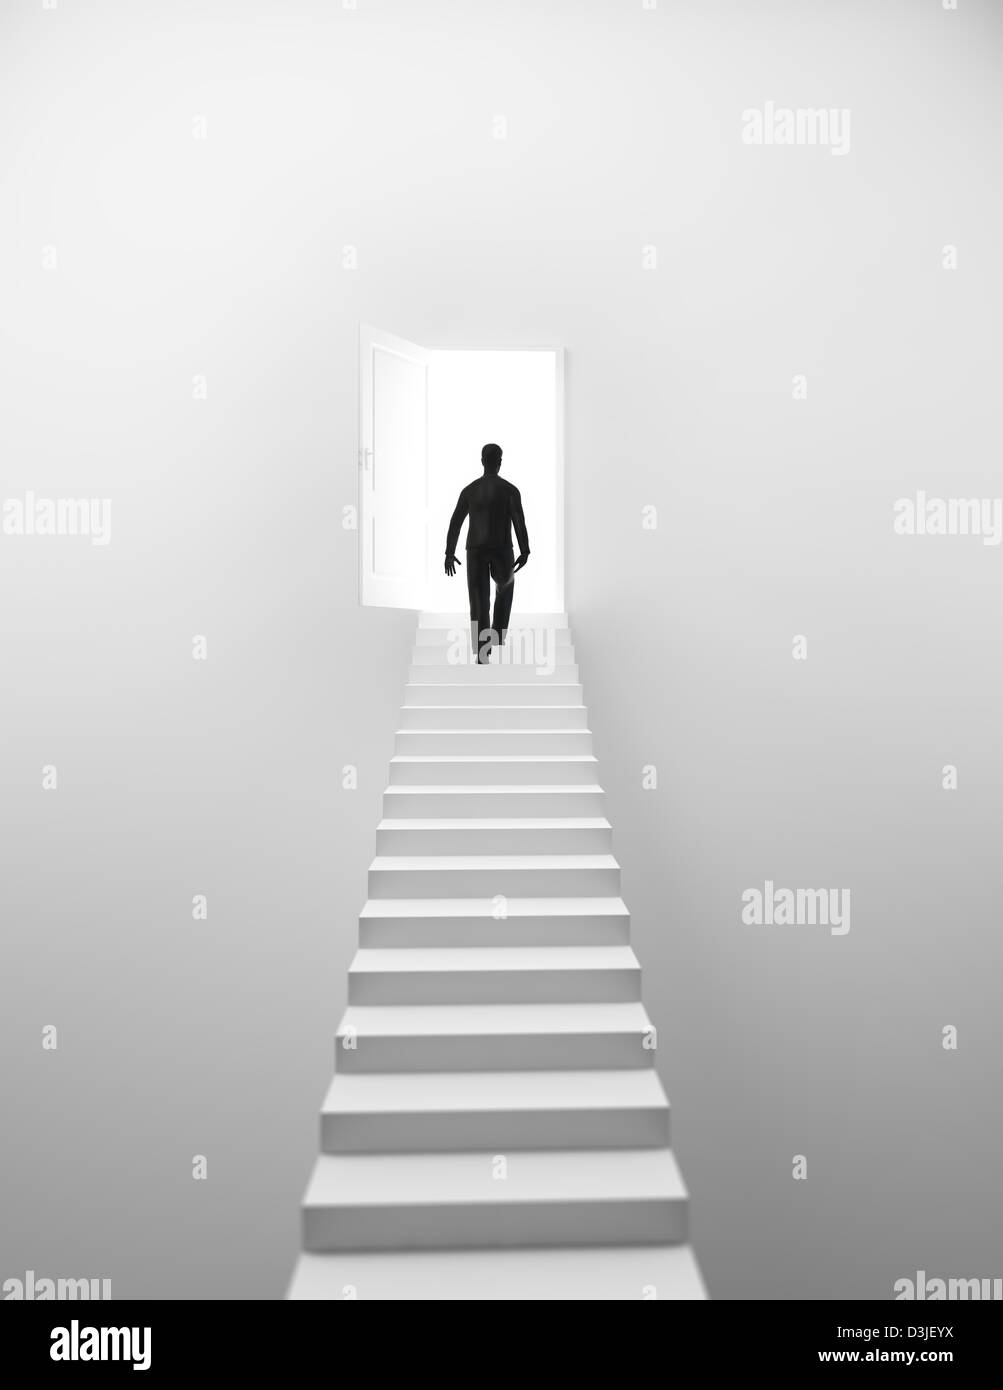 Man walking up the stairs to open doors Stock Photo